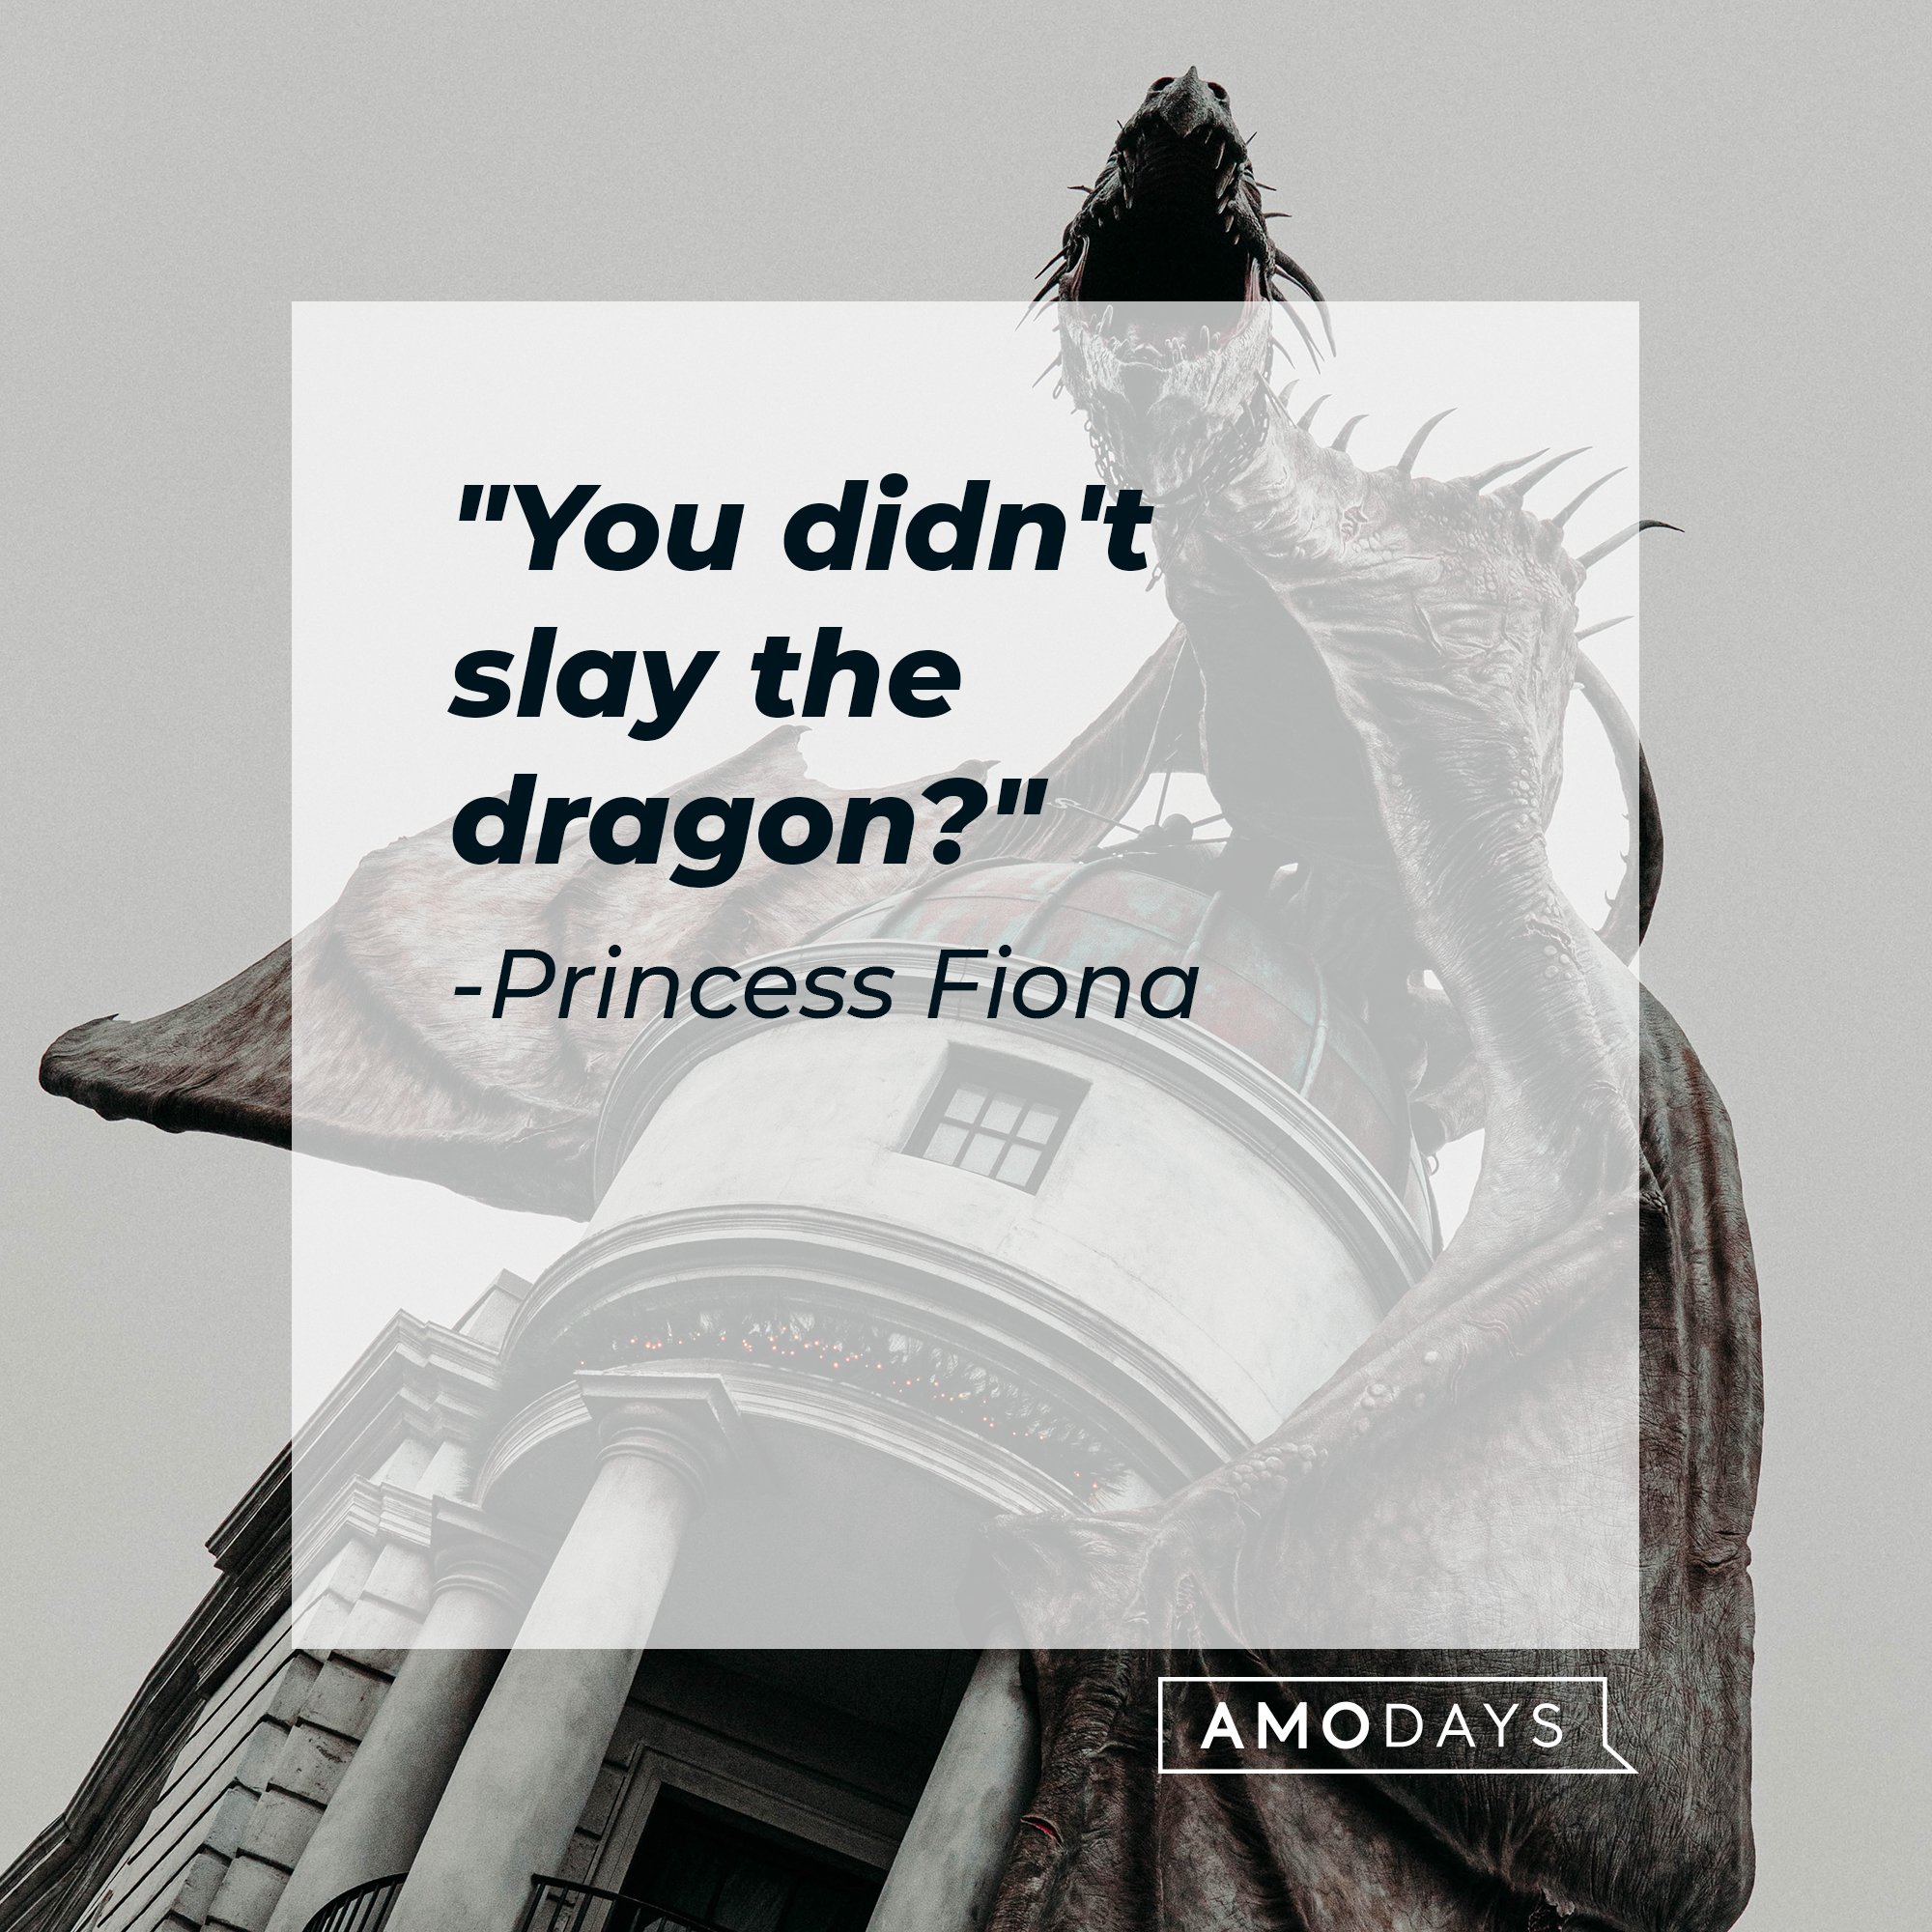 Princess Fiona's quote: "By night one way, by day another, This shall be the norm, Until you find true love's first kiss, Then take love's true form." | Image: AmoDays